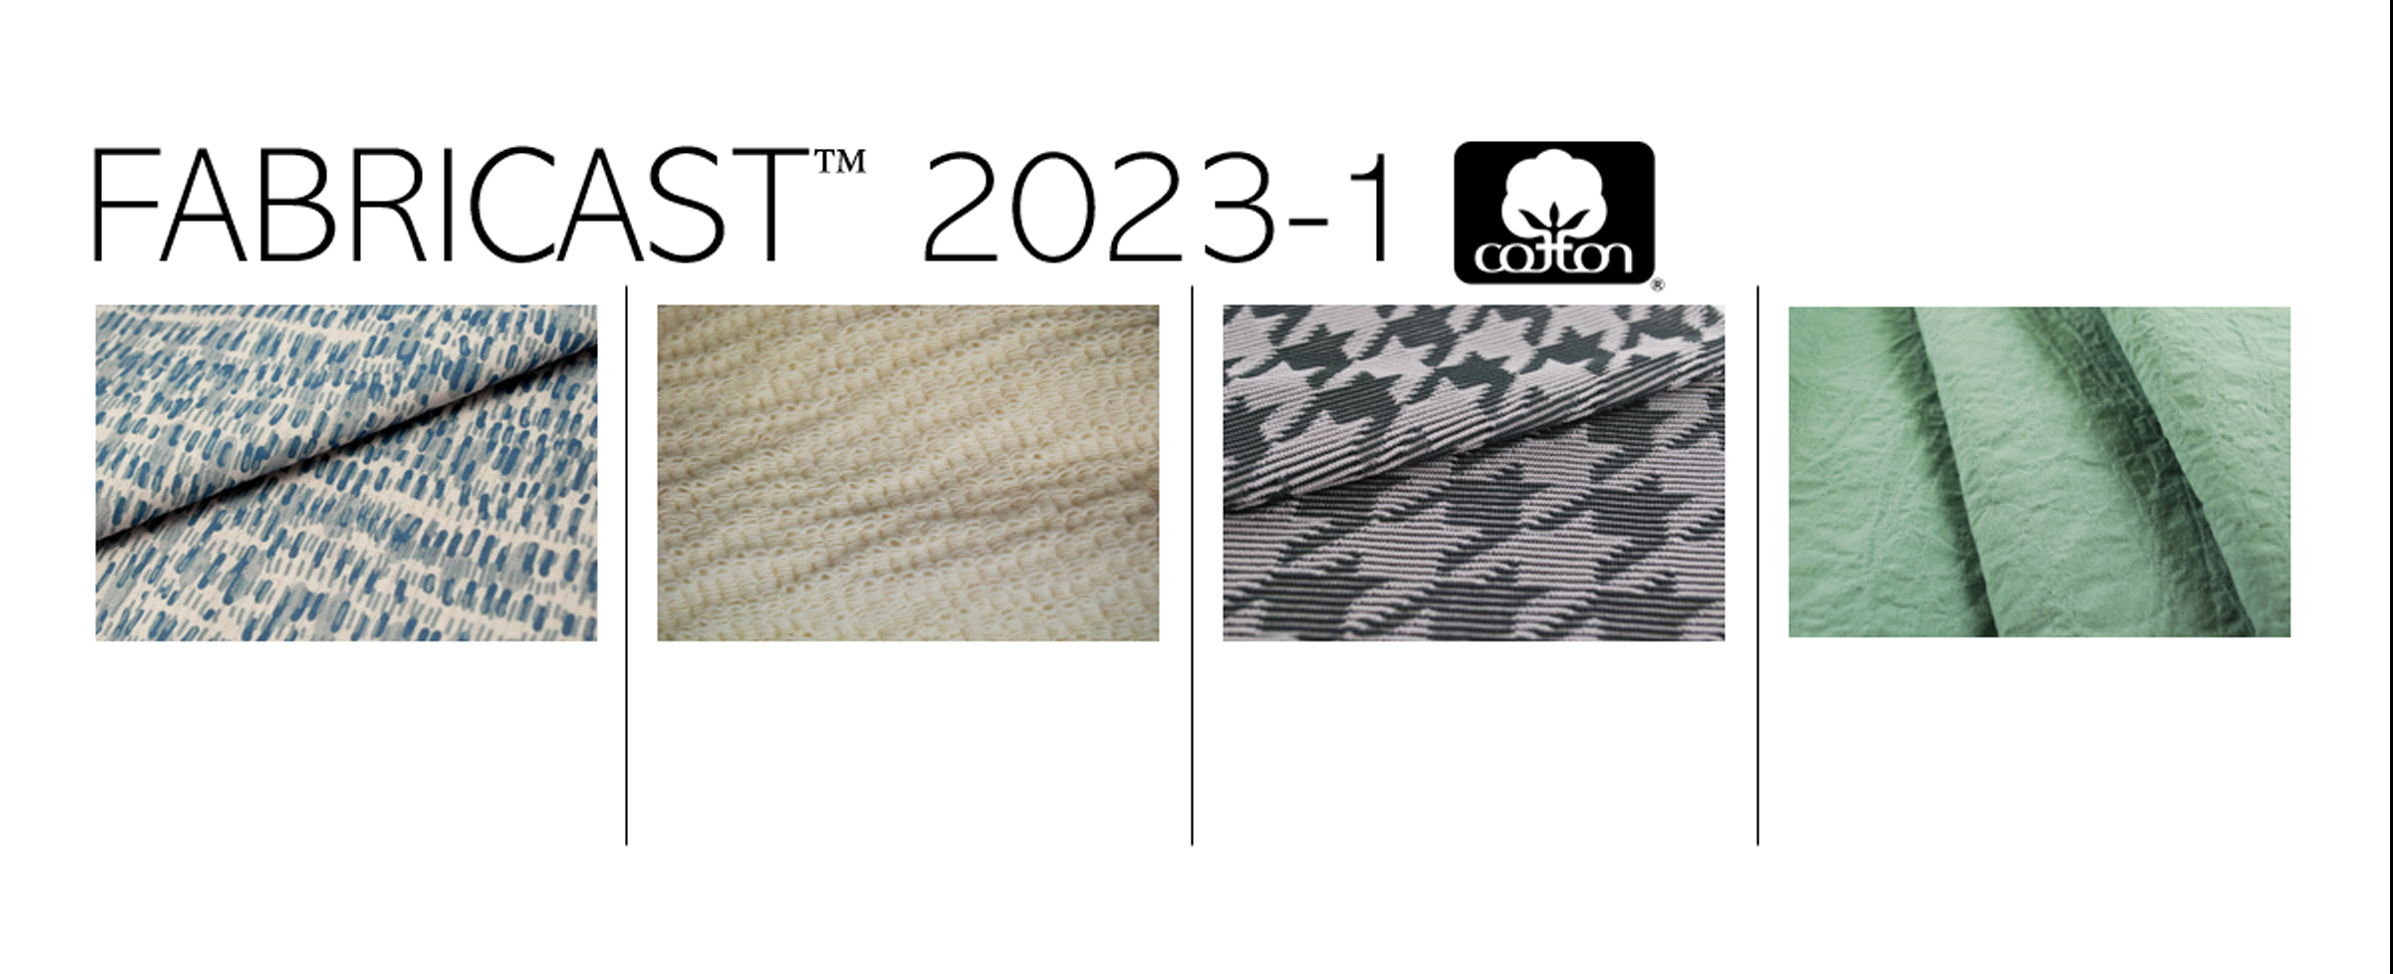 web header title - 2023 FABRICAST™ Fabric Collection